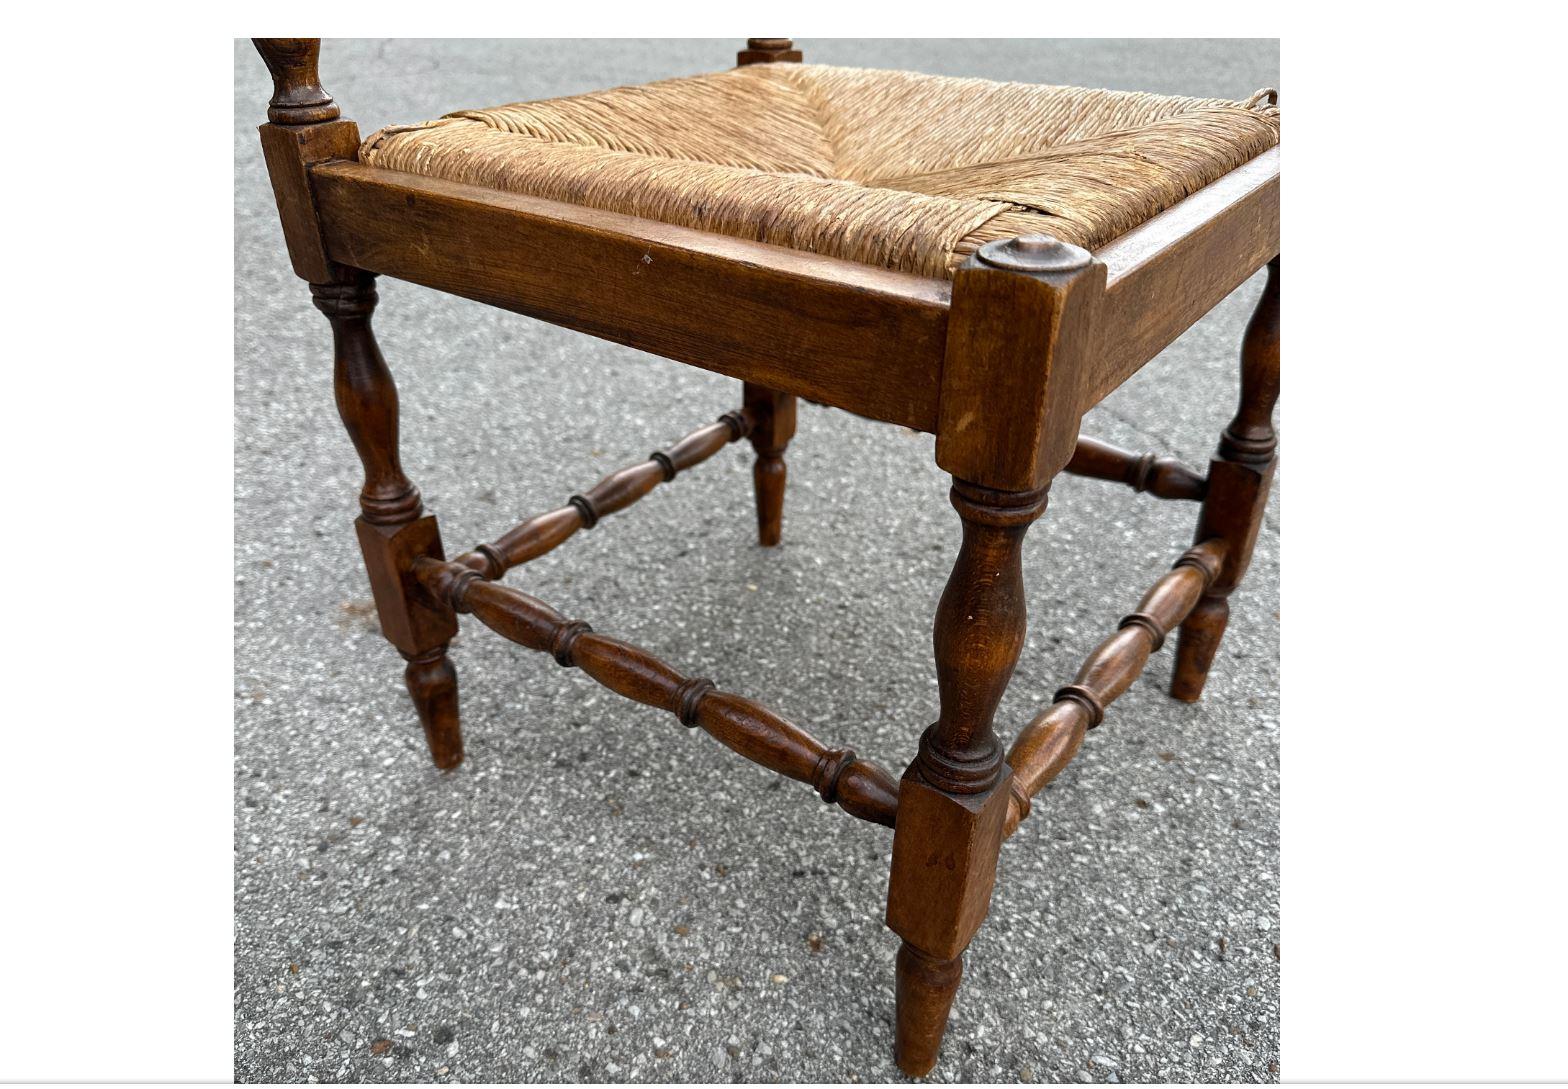 This stunning English chair has the most beautiful and delicate detailing in the woodwork. The details are beautiful and would look incredible in a more traditional or English styled home. The rush seats are in great shape and really tie the piece